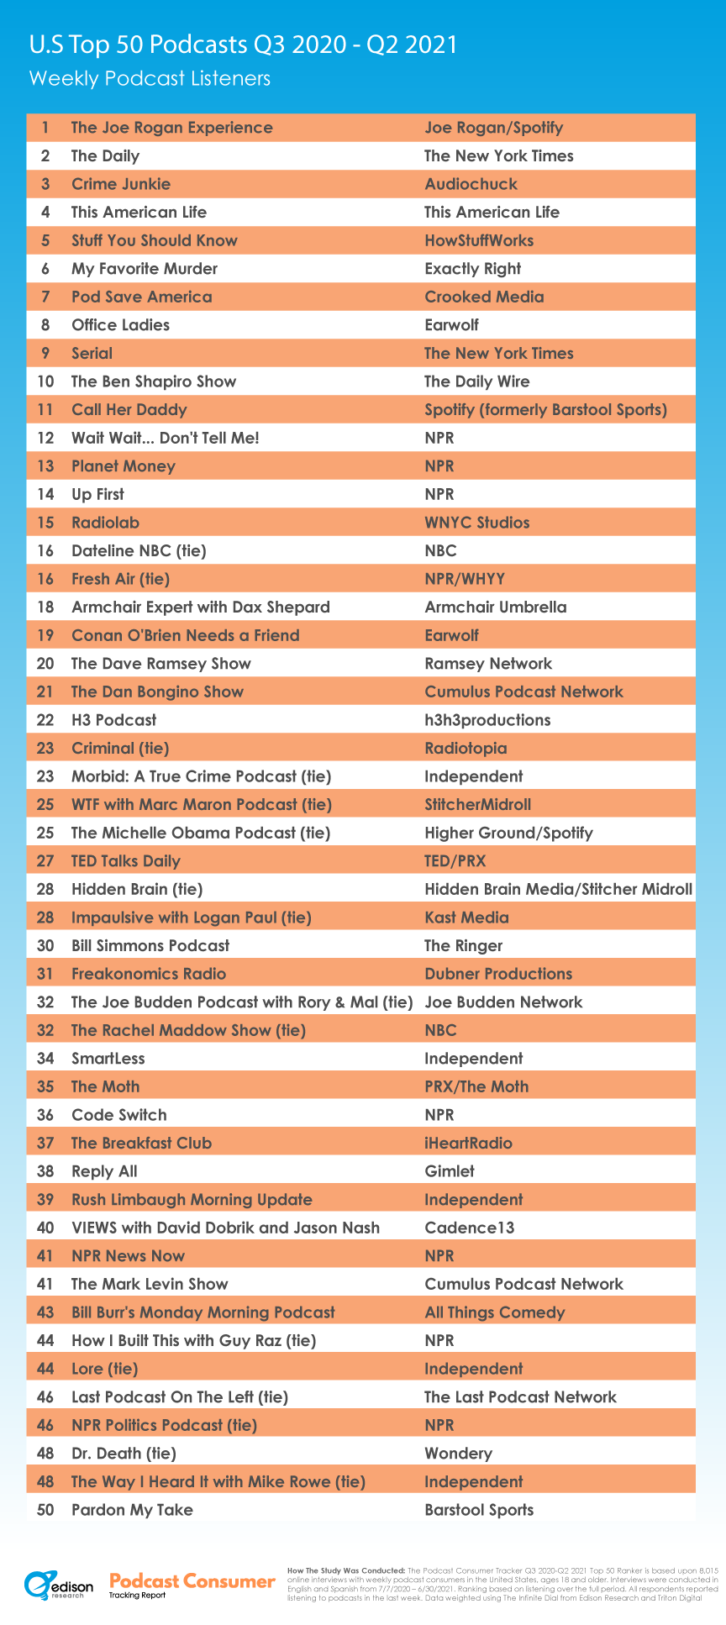 Graphic showing top 50 U.S. podcasts as measured by Edison Research in Q2 2021